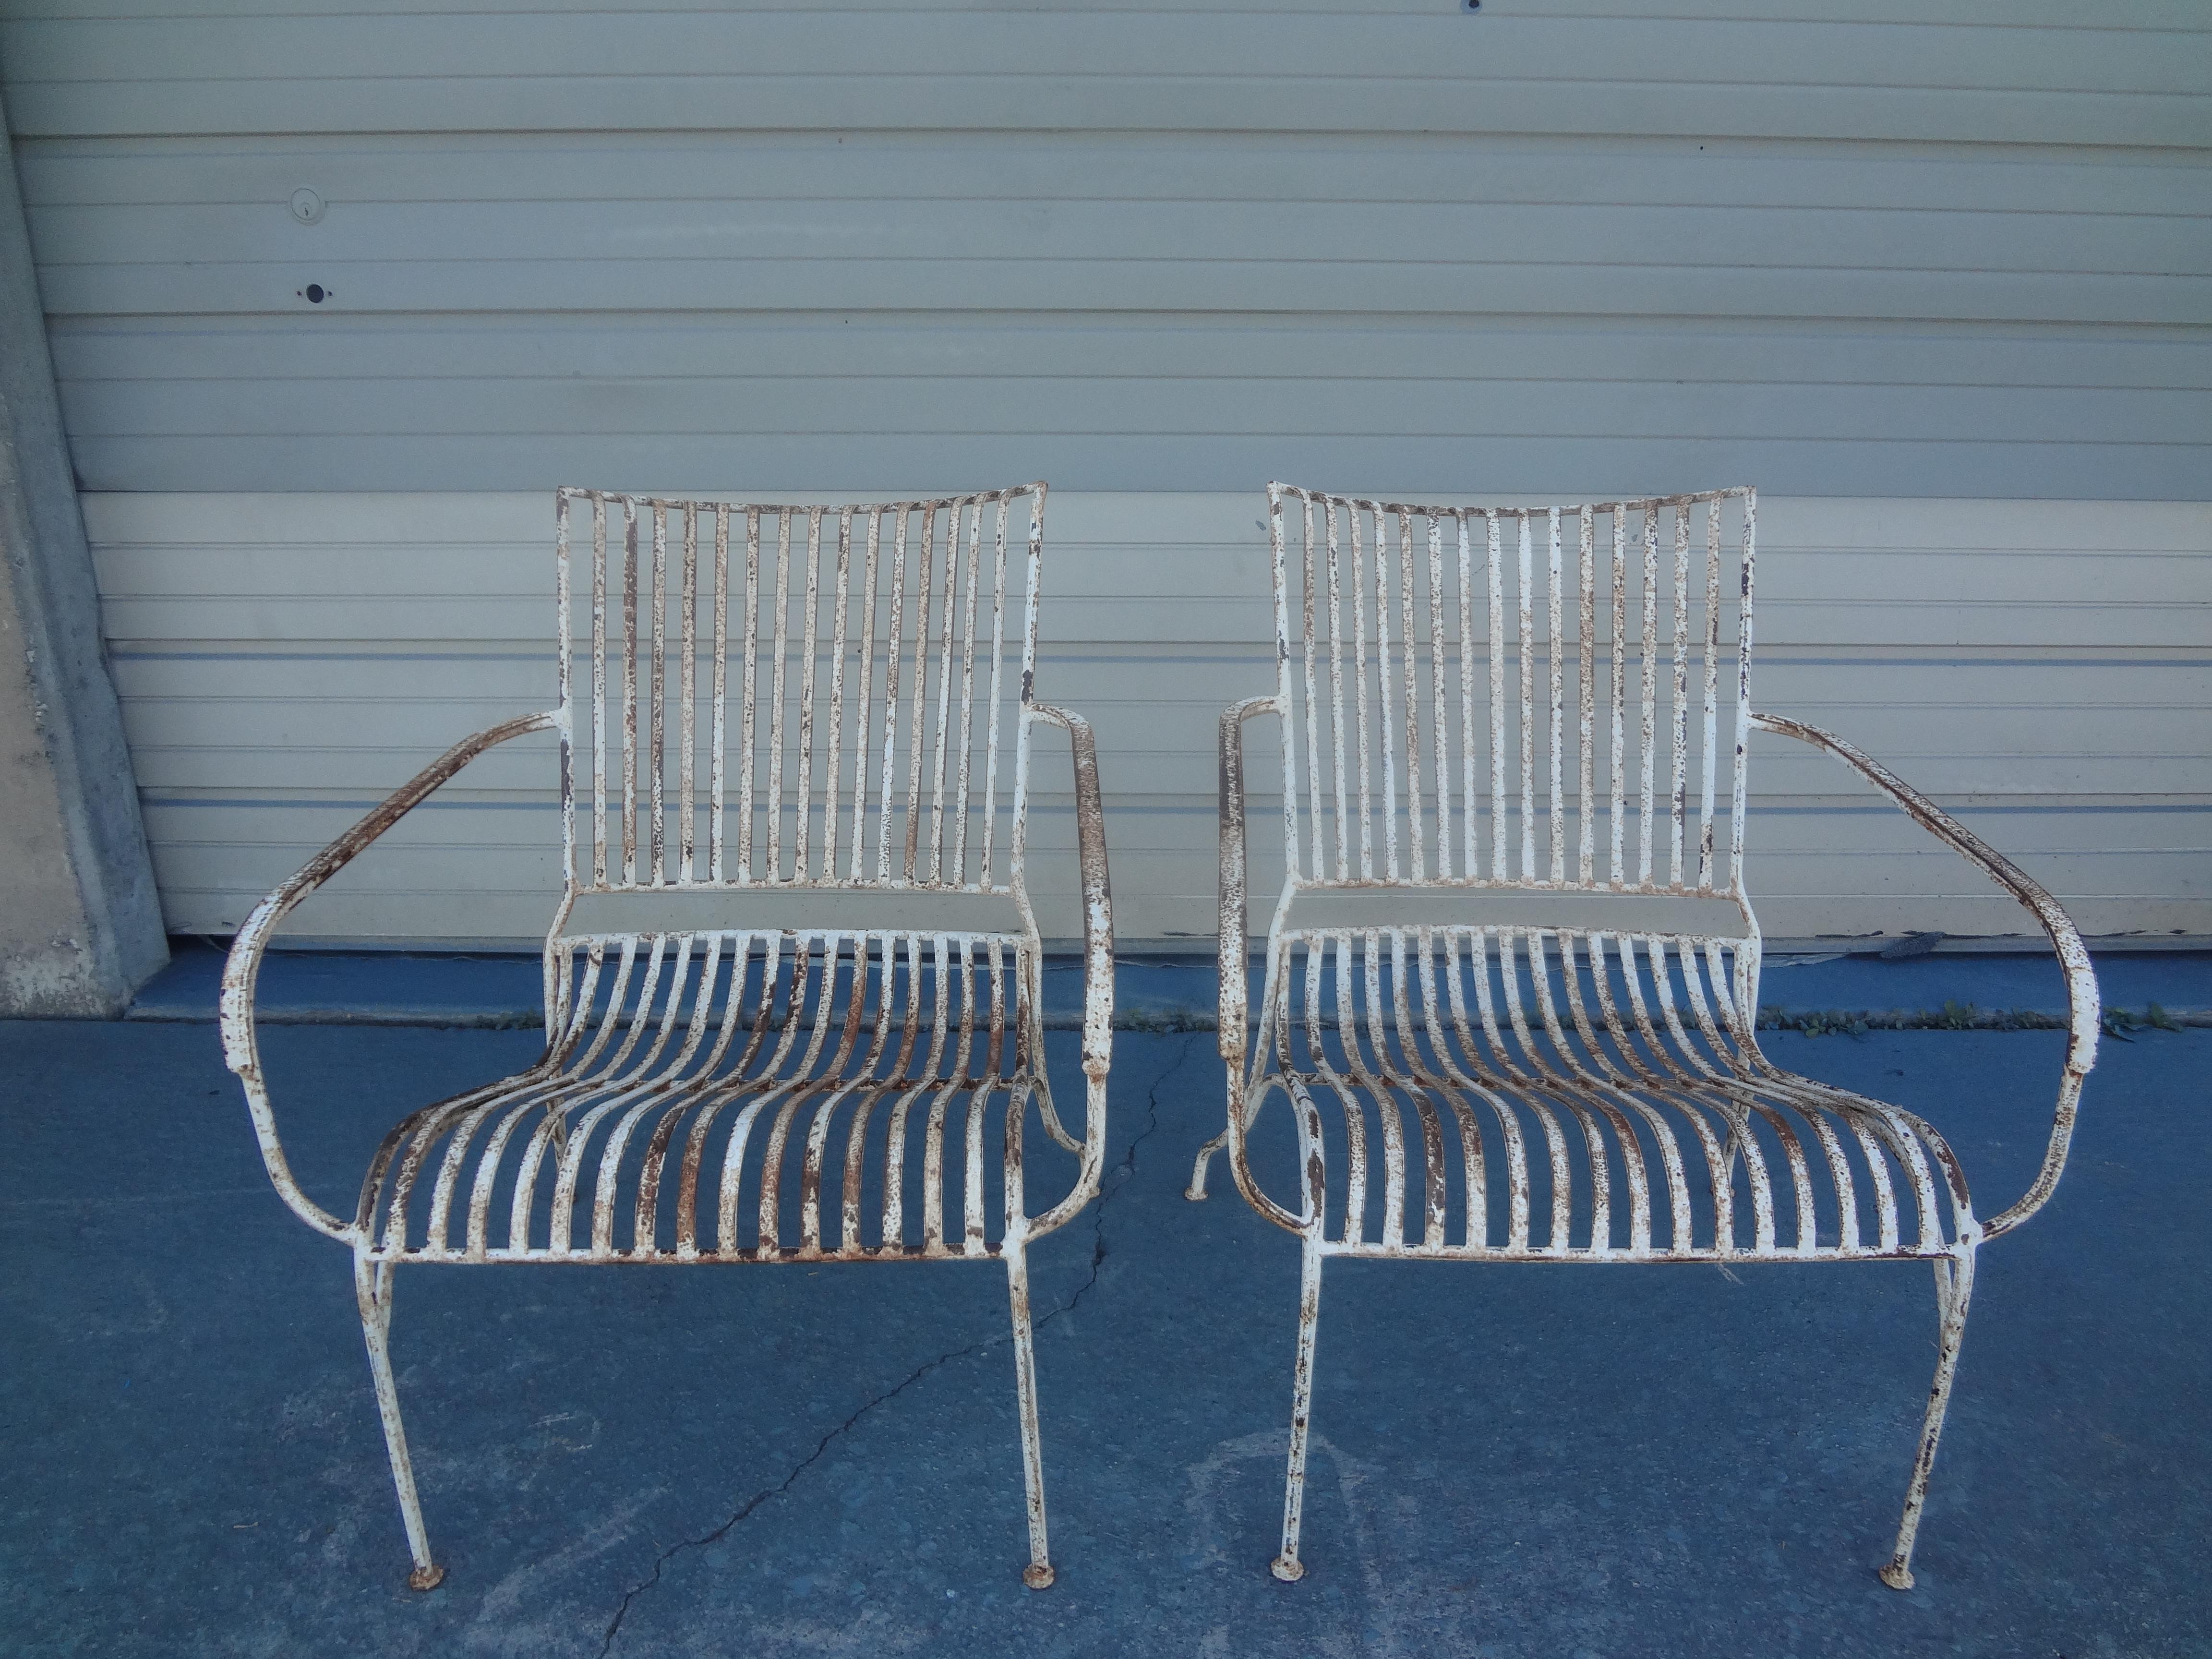 Pair Of French Wrought Iron Garden Chairs.
These stylish and shapely French iron garden chairs are stunning from every angle and most comfortable. Great for use outdoors or in an indoor garden room or solarium. 